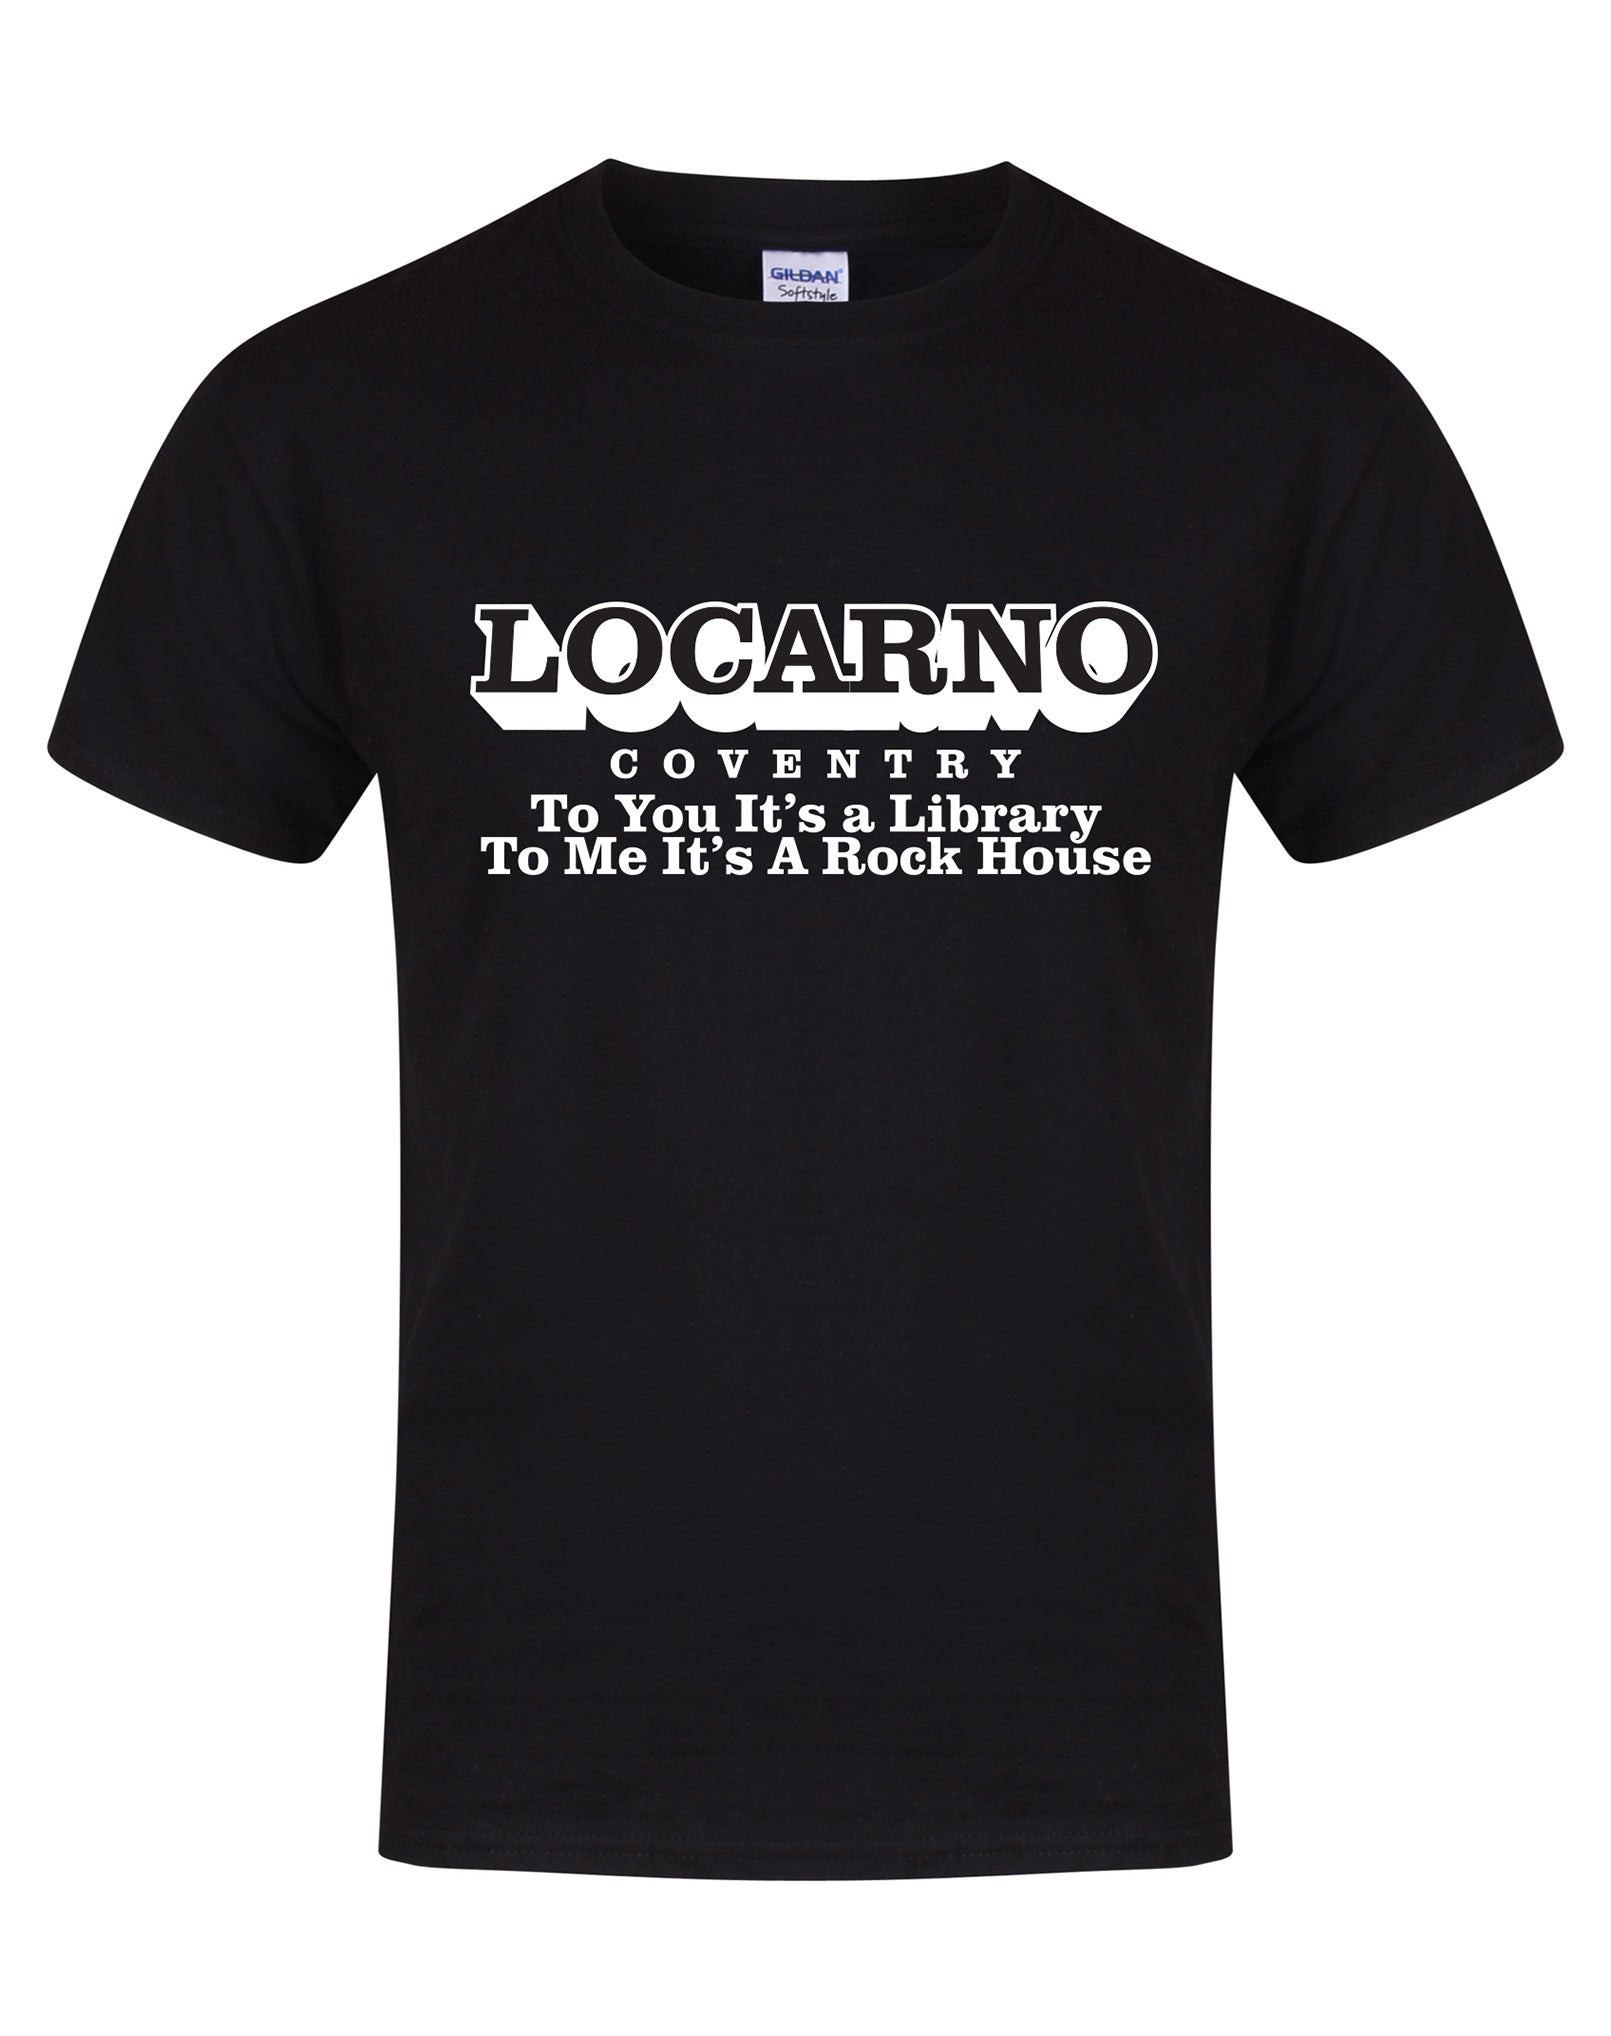 Locarno/Rockhouse - Coventry - unisex fit T-shirt - various colours - Dirty Stop Outs